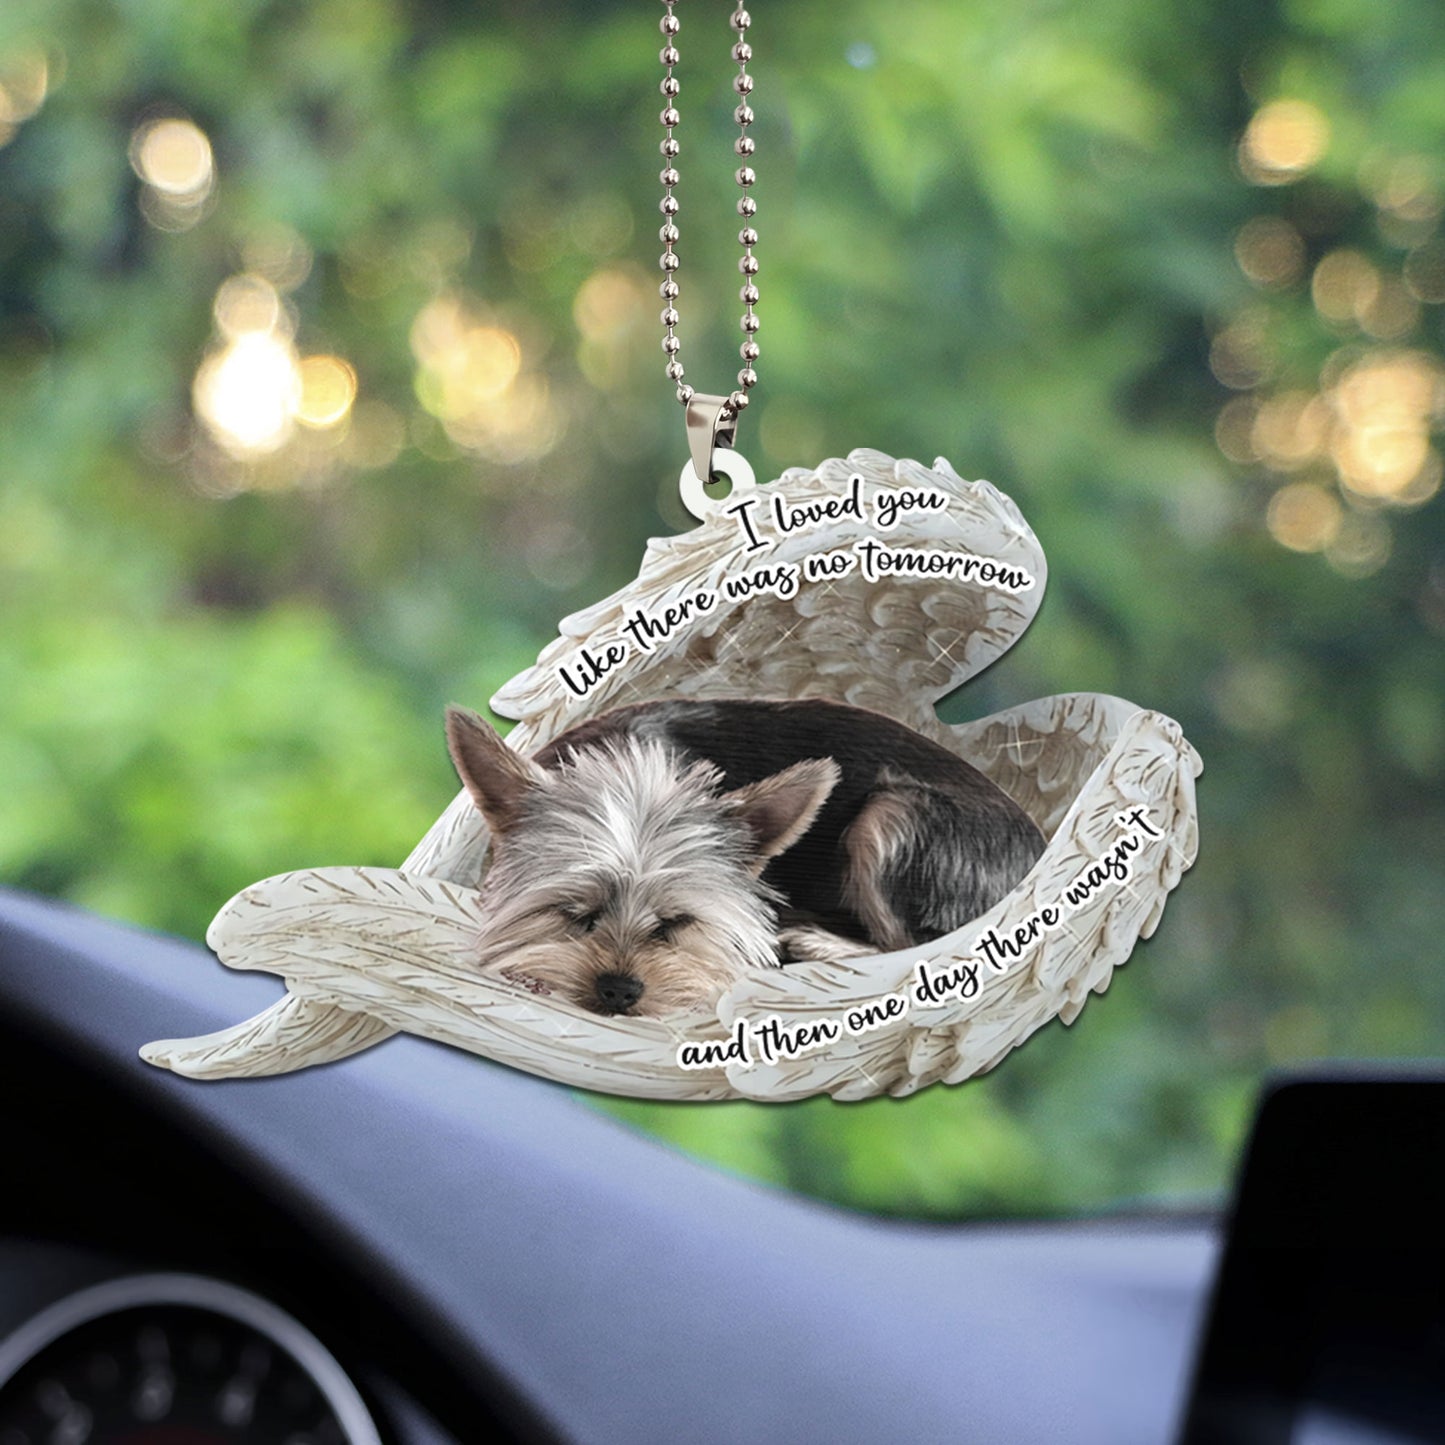 Yorkshire Terrier Sleeping Angel Personalizedwitch Flat Car Ornament